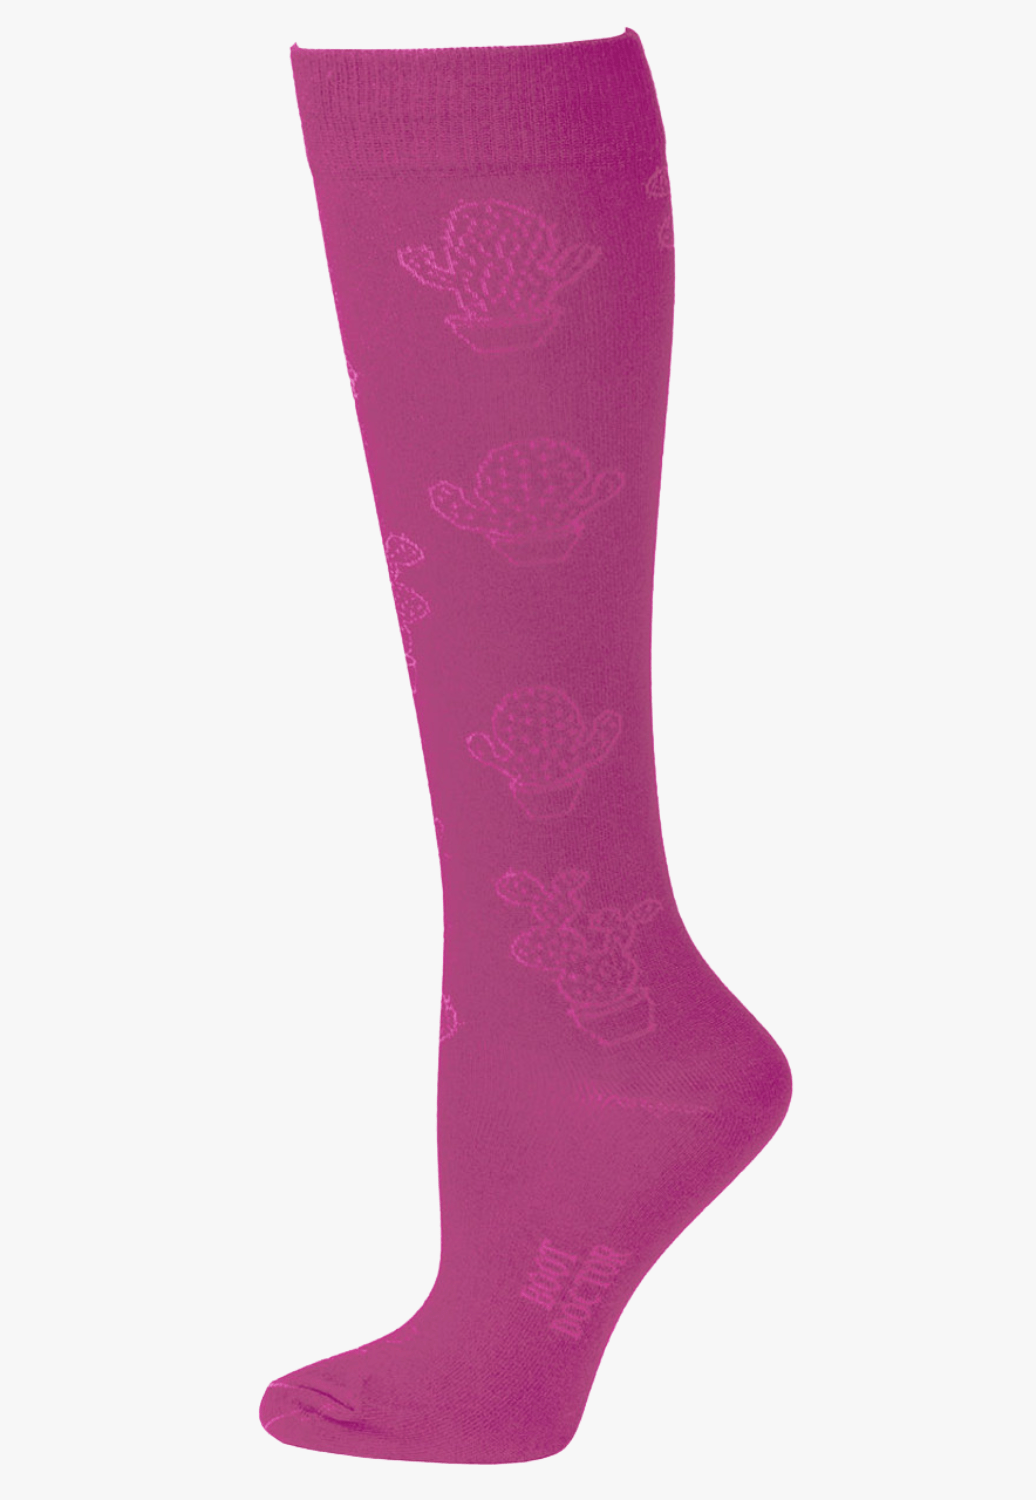 Boot Doctor ACCESSORIES-Socks OSFA / Pink Boot Doctor Womens Cactus Pattern Socks